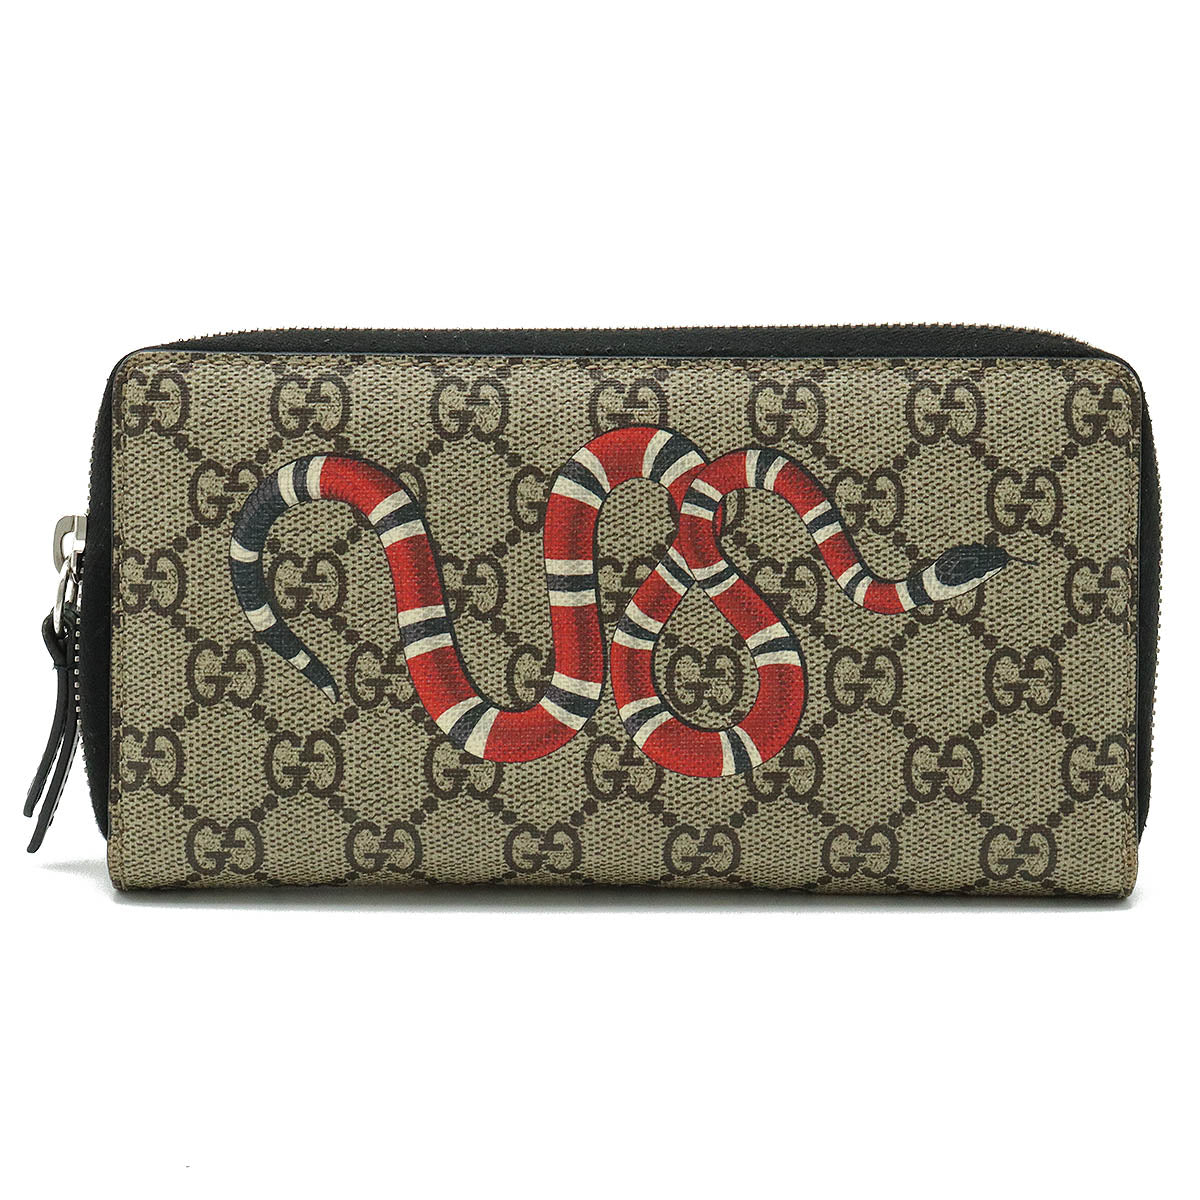 GUCCI Gucci GG Spring Zipper Round Wallet Snake Snake Round  Long Wallet PVC Leather Karkebear Red 451273  Zipper Bluemine/Moseda Quality